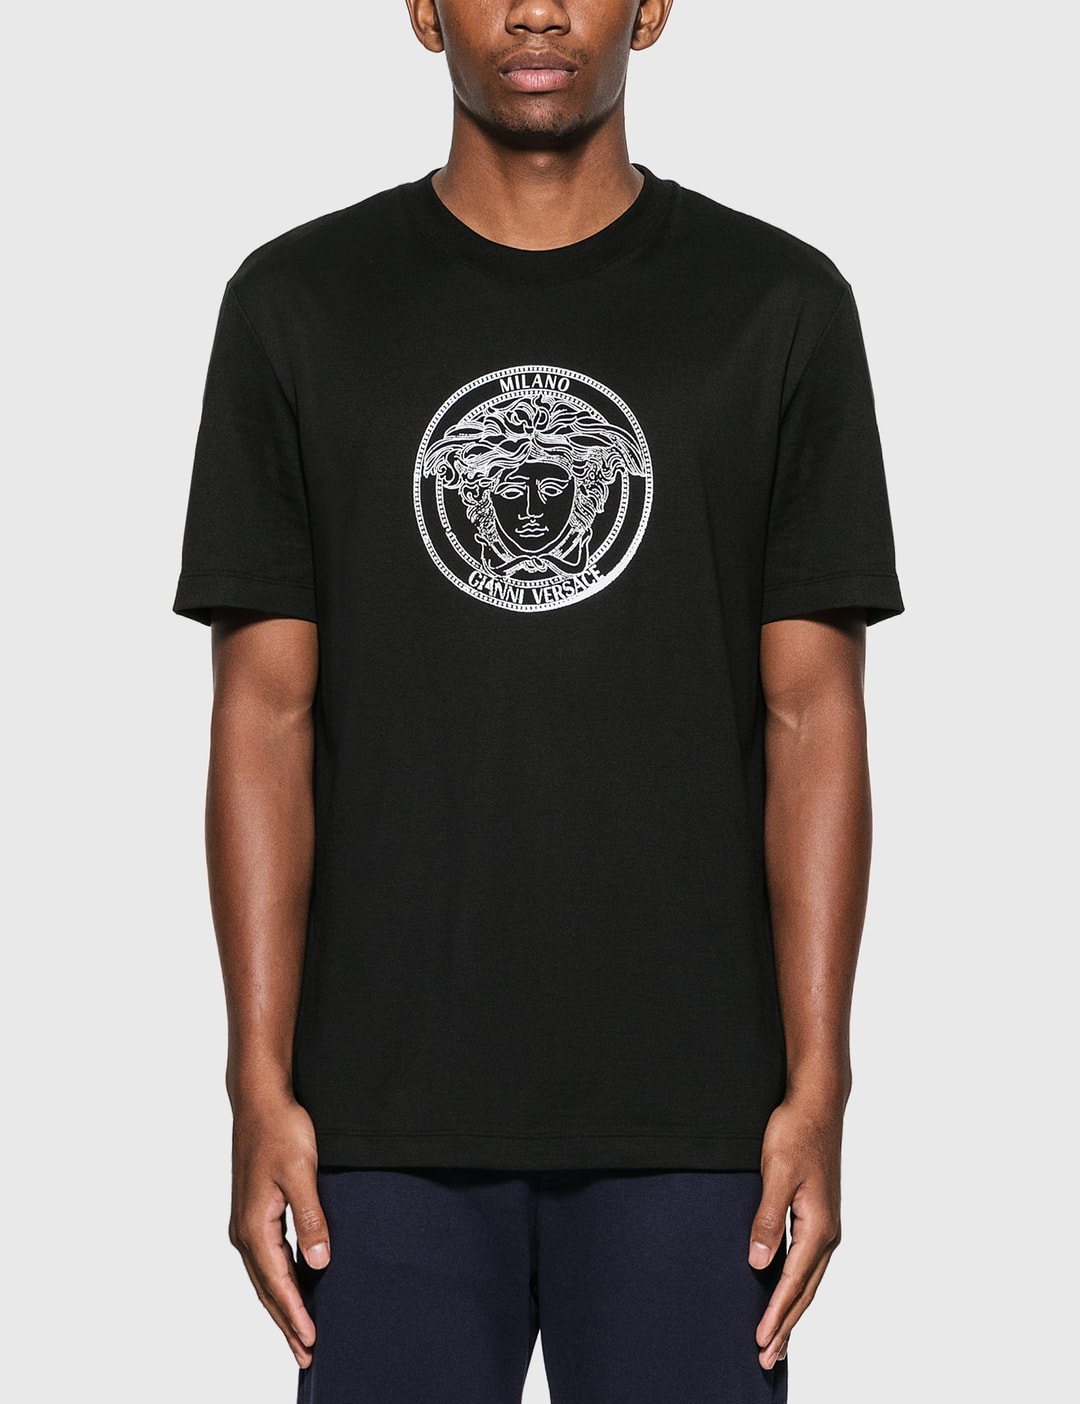 Versace - Medusa T-Shirt | HBX - Globally Curated Fashion and Lifestyle ...